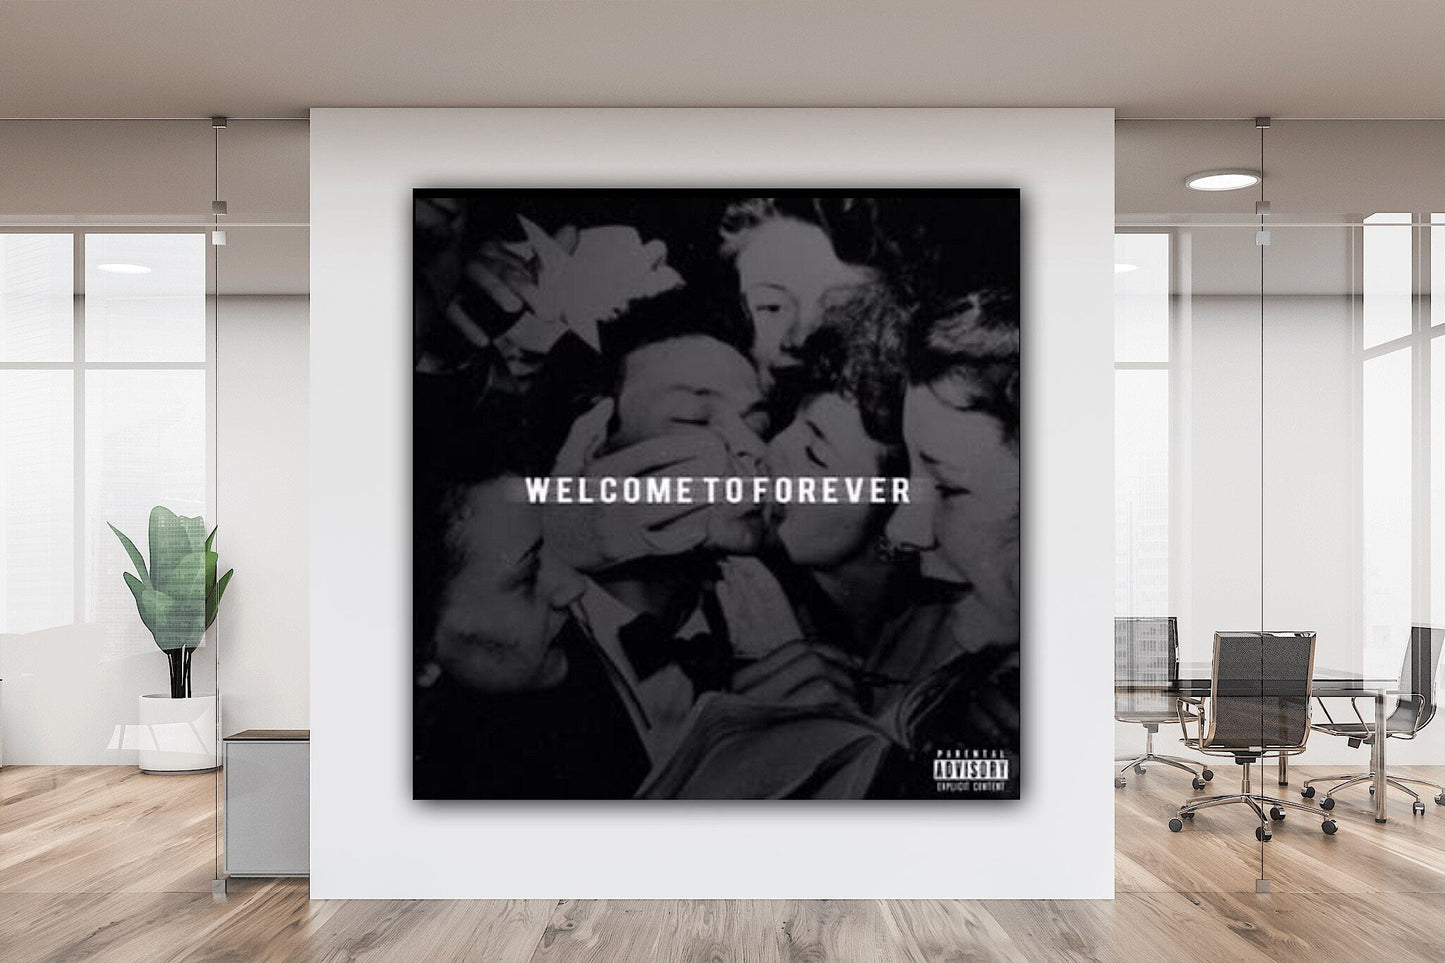 Logic - Welcome to Forever